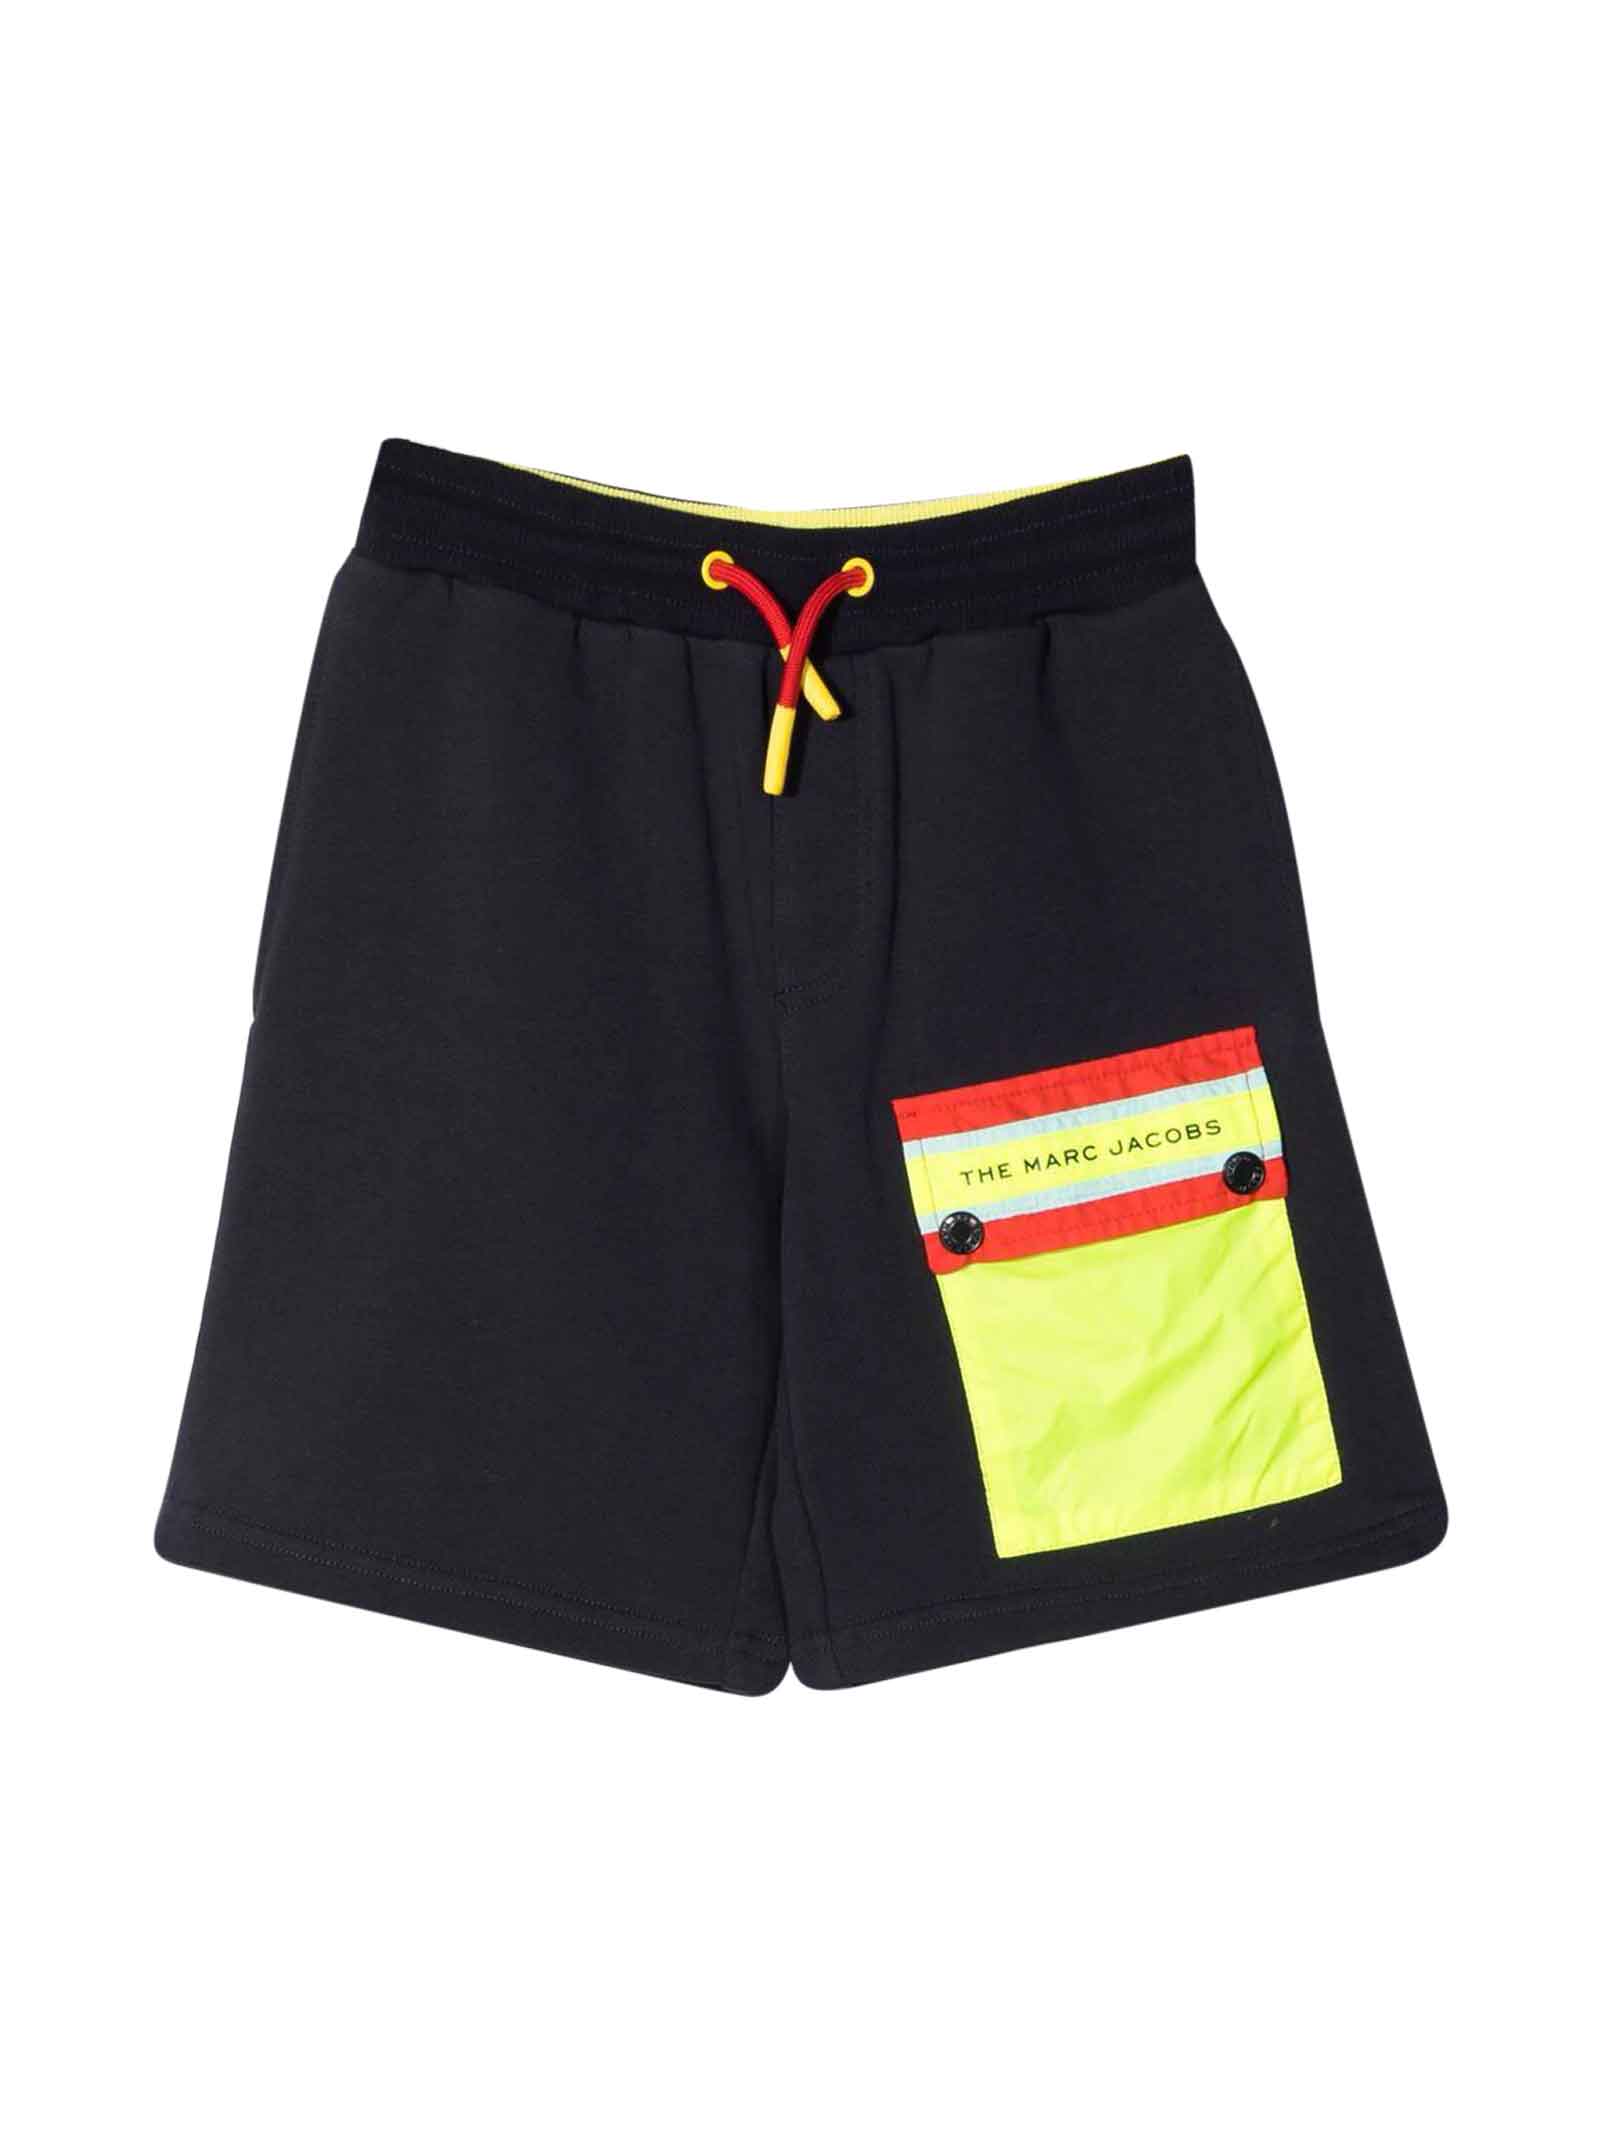 Little Marc Jacobs Black Bermuda Shorts With Yellow Print